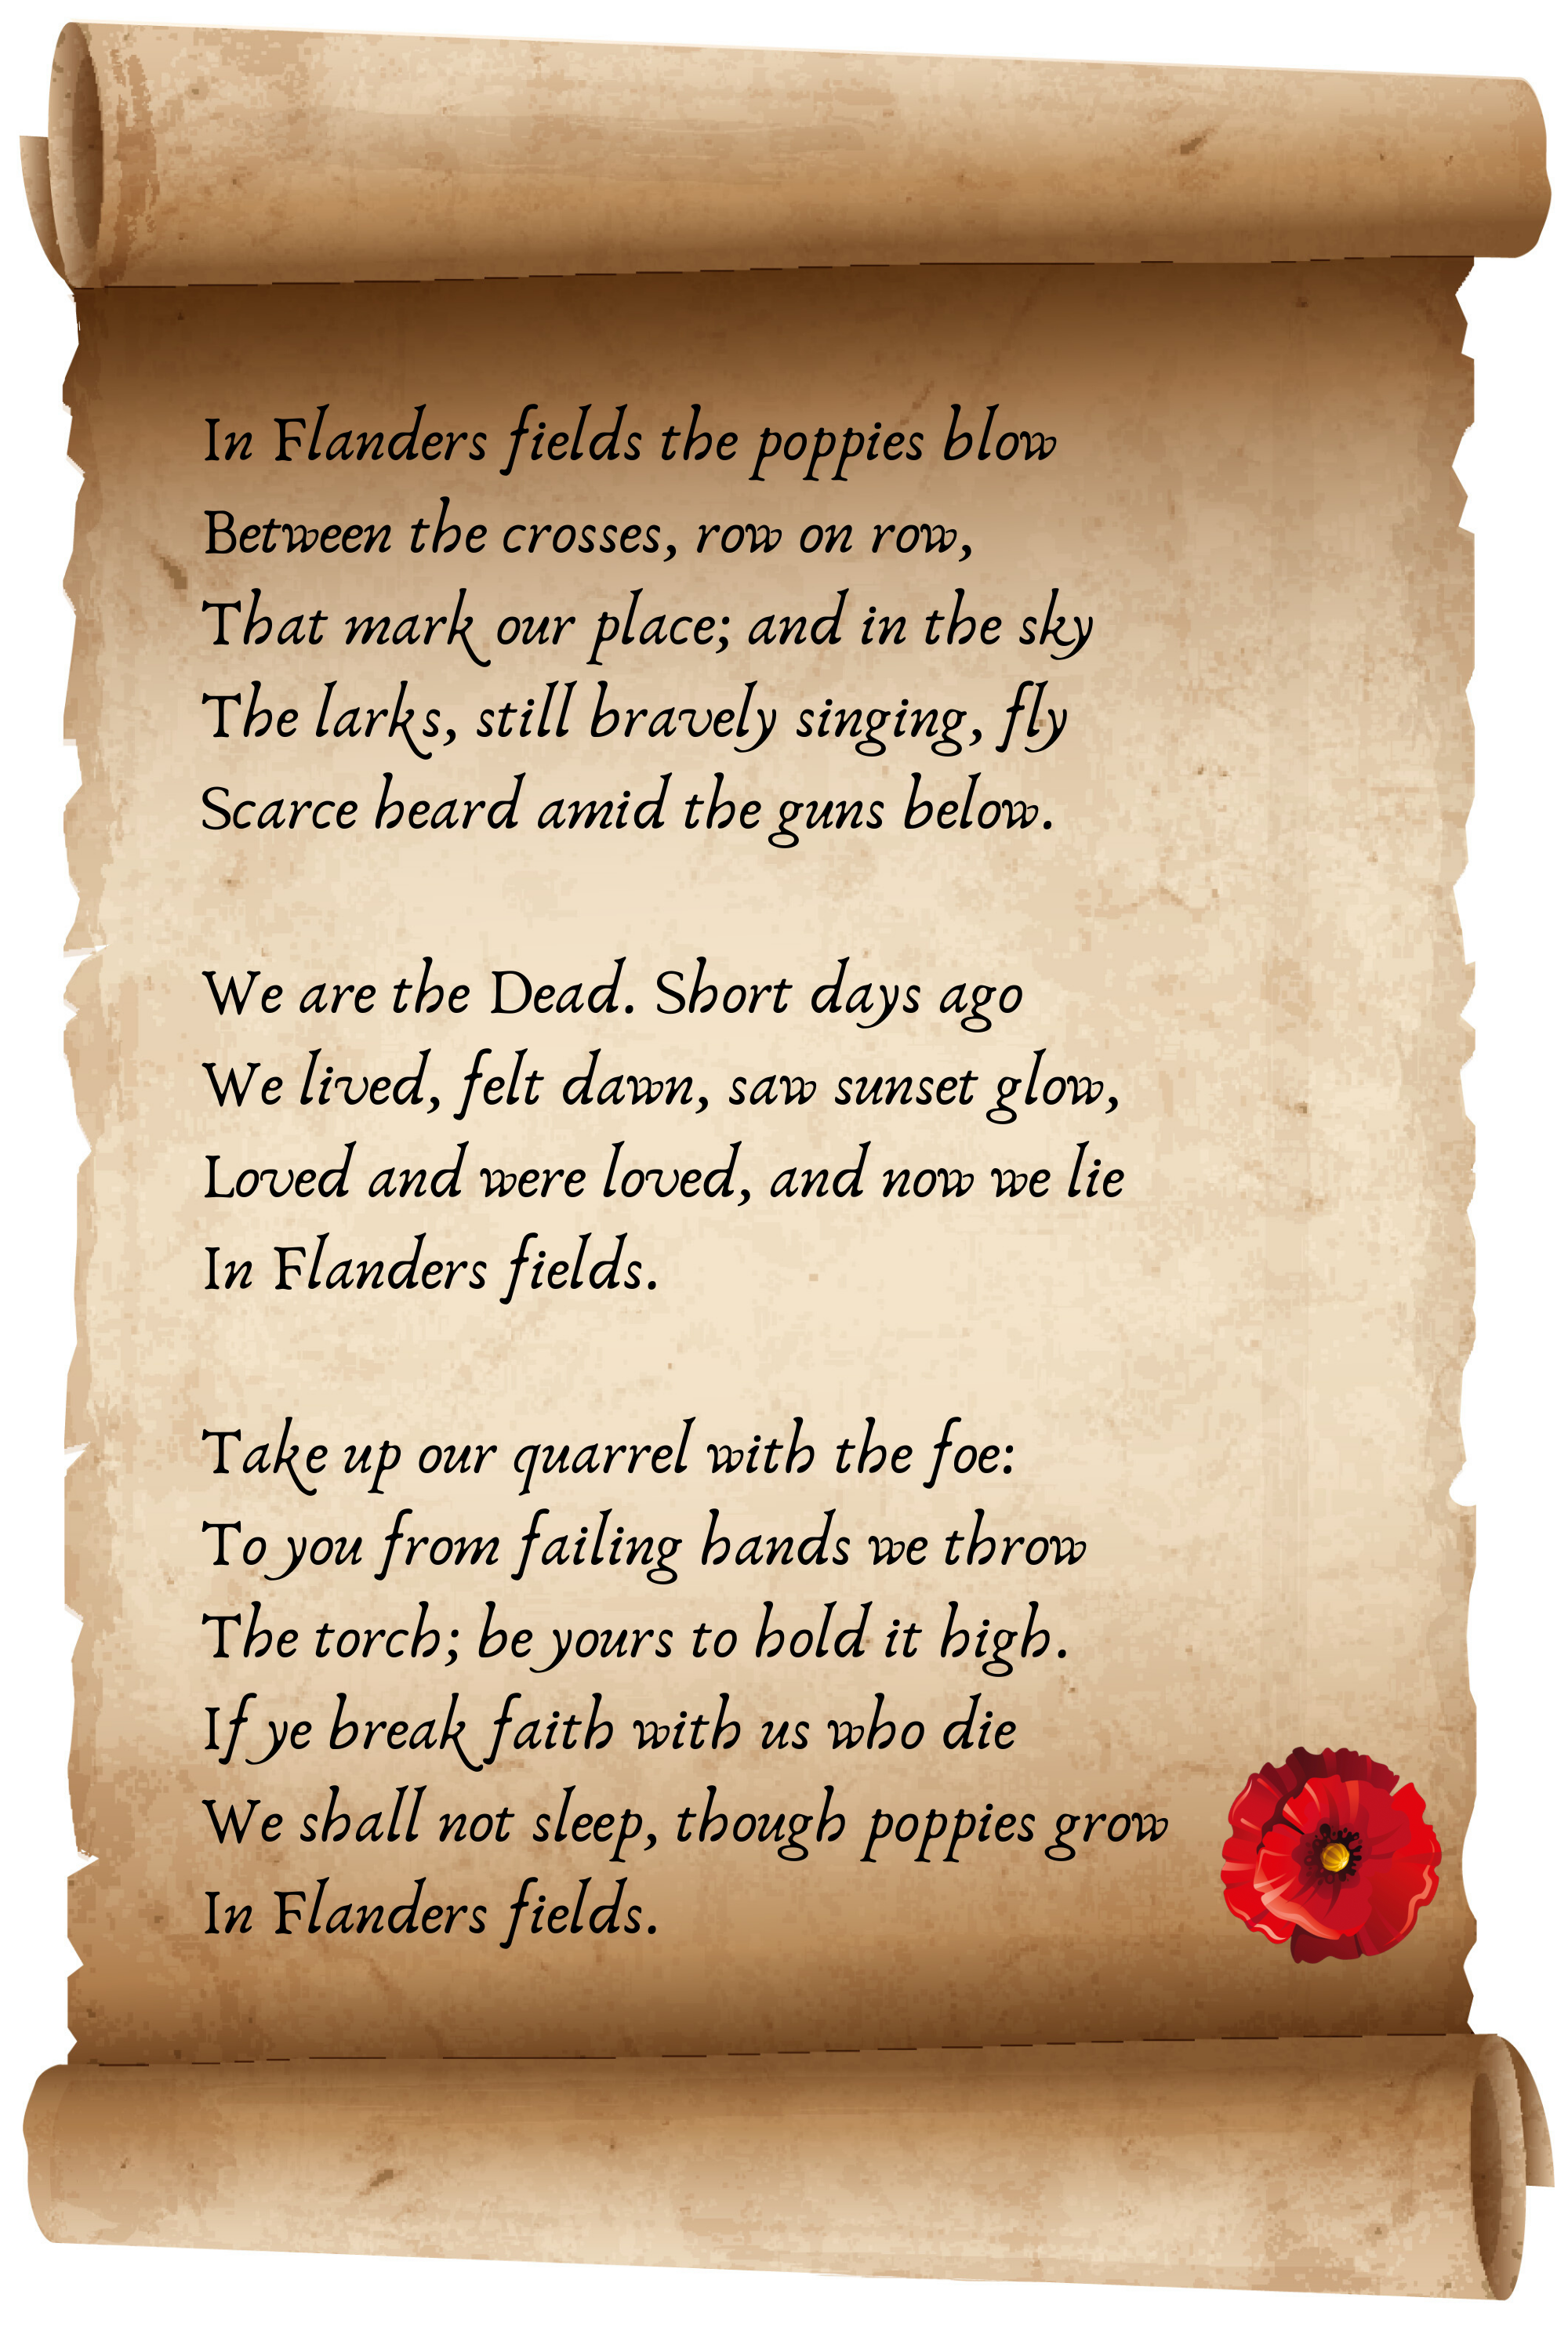 In Flanders fields the poppies blow Between the crosses, row on row, That mark our place; and in the sky The larks, still bravely singing, fly Scarce heard amid the guns below.